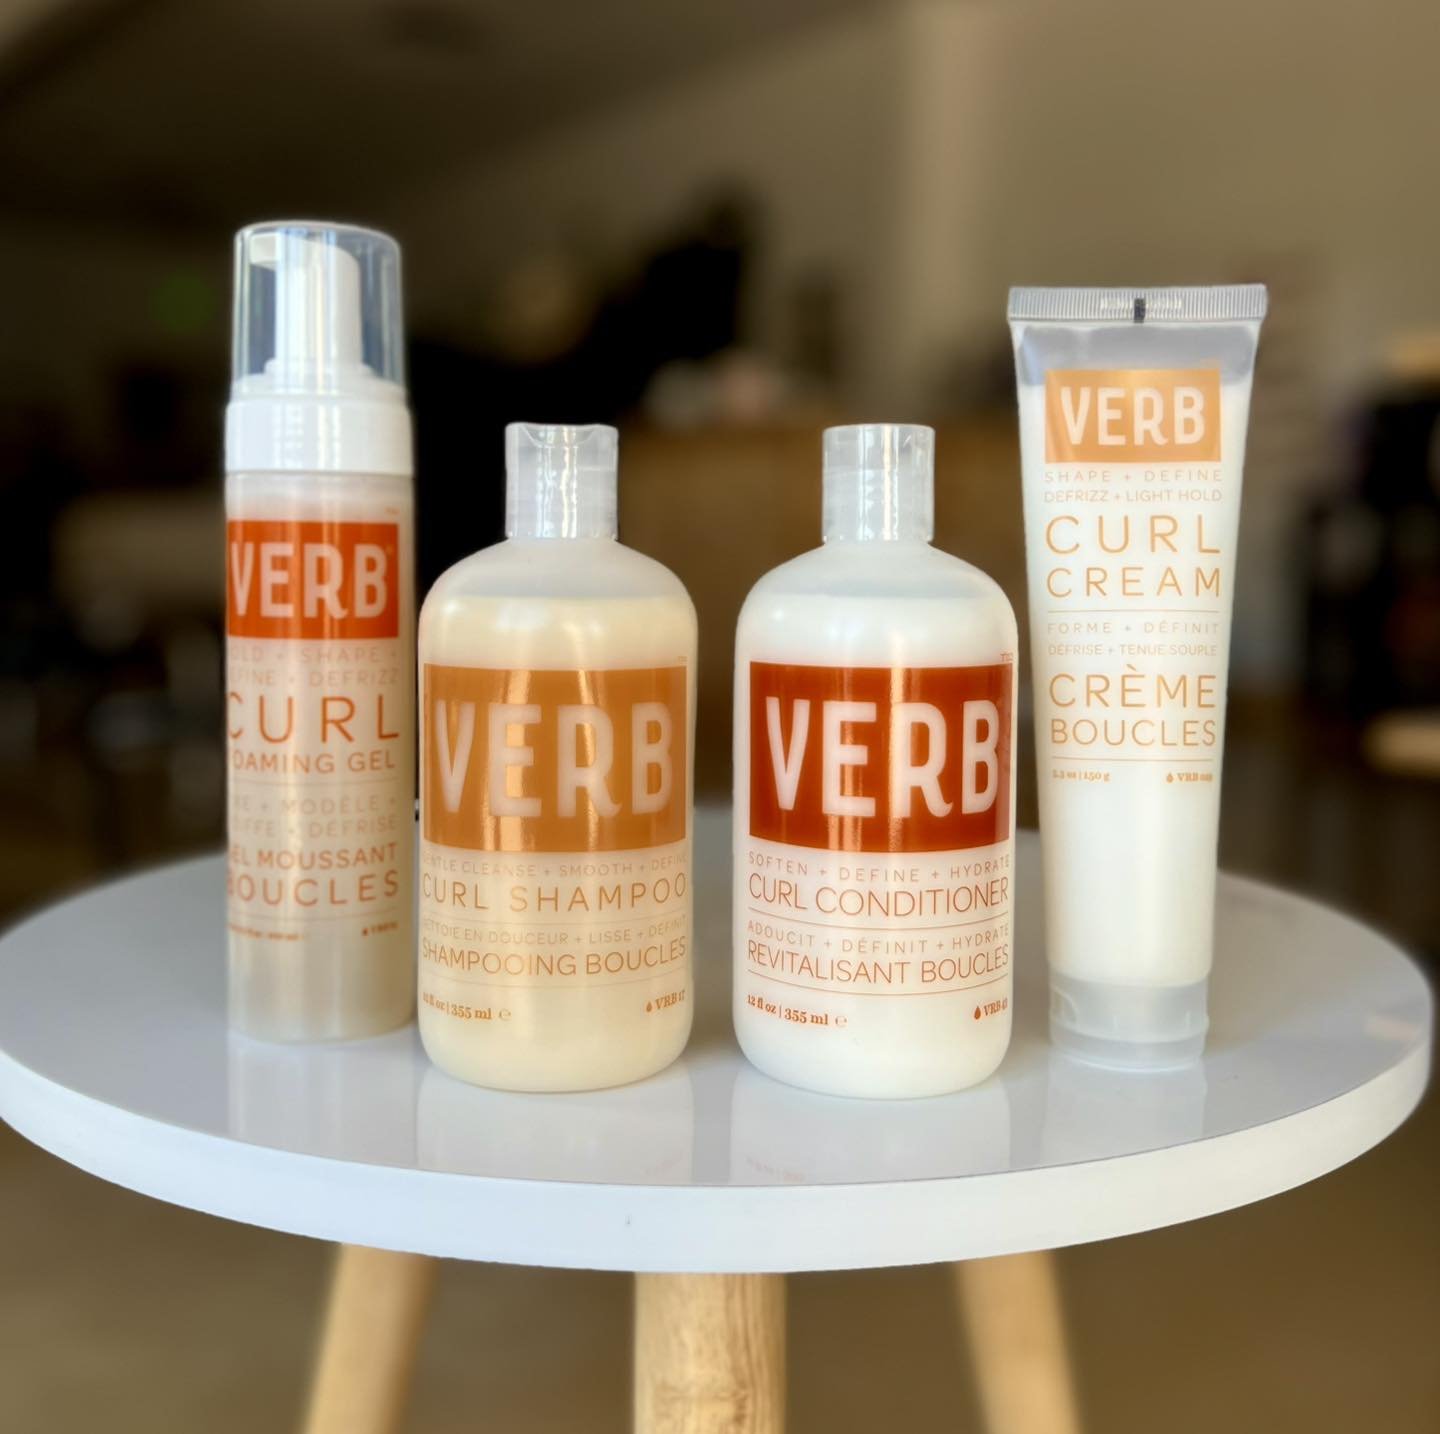 🧡 GIVEAWAY 🧡

VERB Curl Shampoo + Conditioner, Curl Cream + Curl Foaming Gel

🔸 Sunflower Seed Extract 🌻 in this line restores moisture, fights off frizz and adds shine. Extra nourishment, every step of the way.

🔸 Start wash day off with a soft